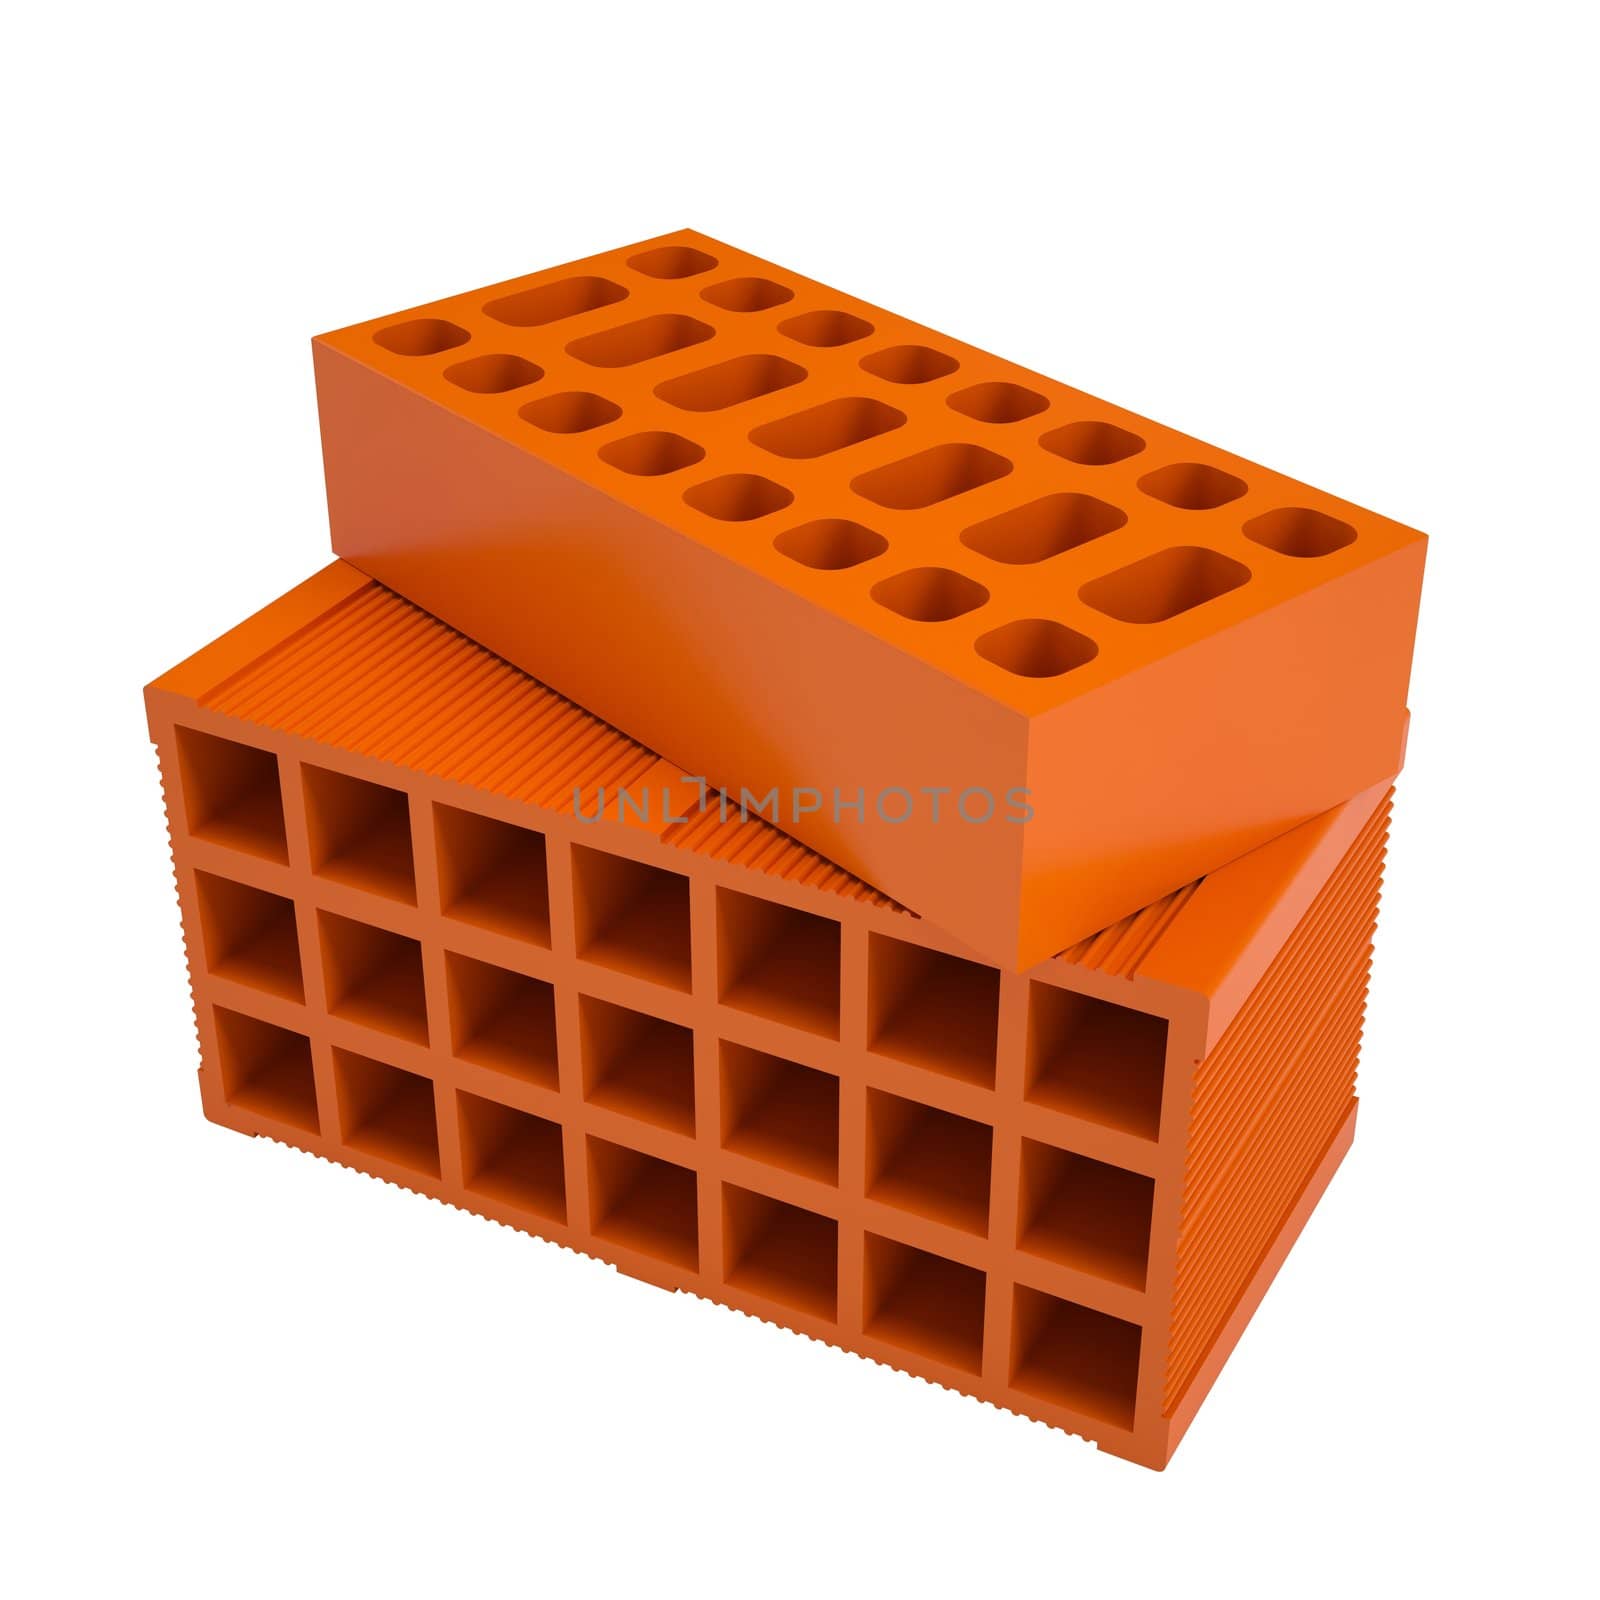 Red bricks. Isolated render on a white background